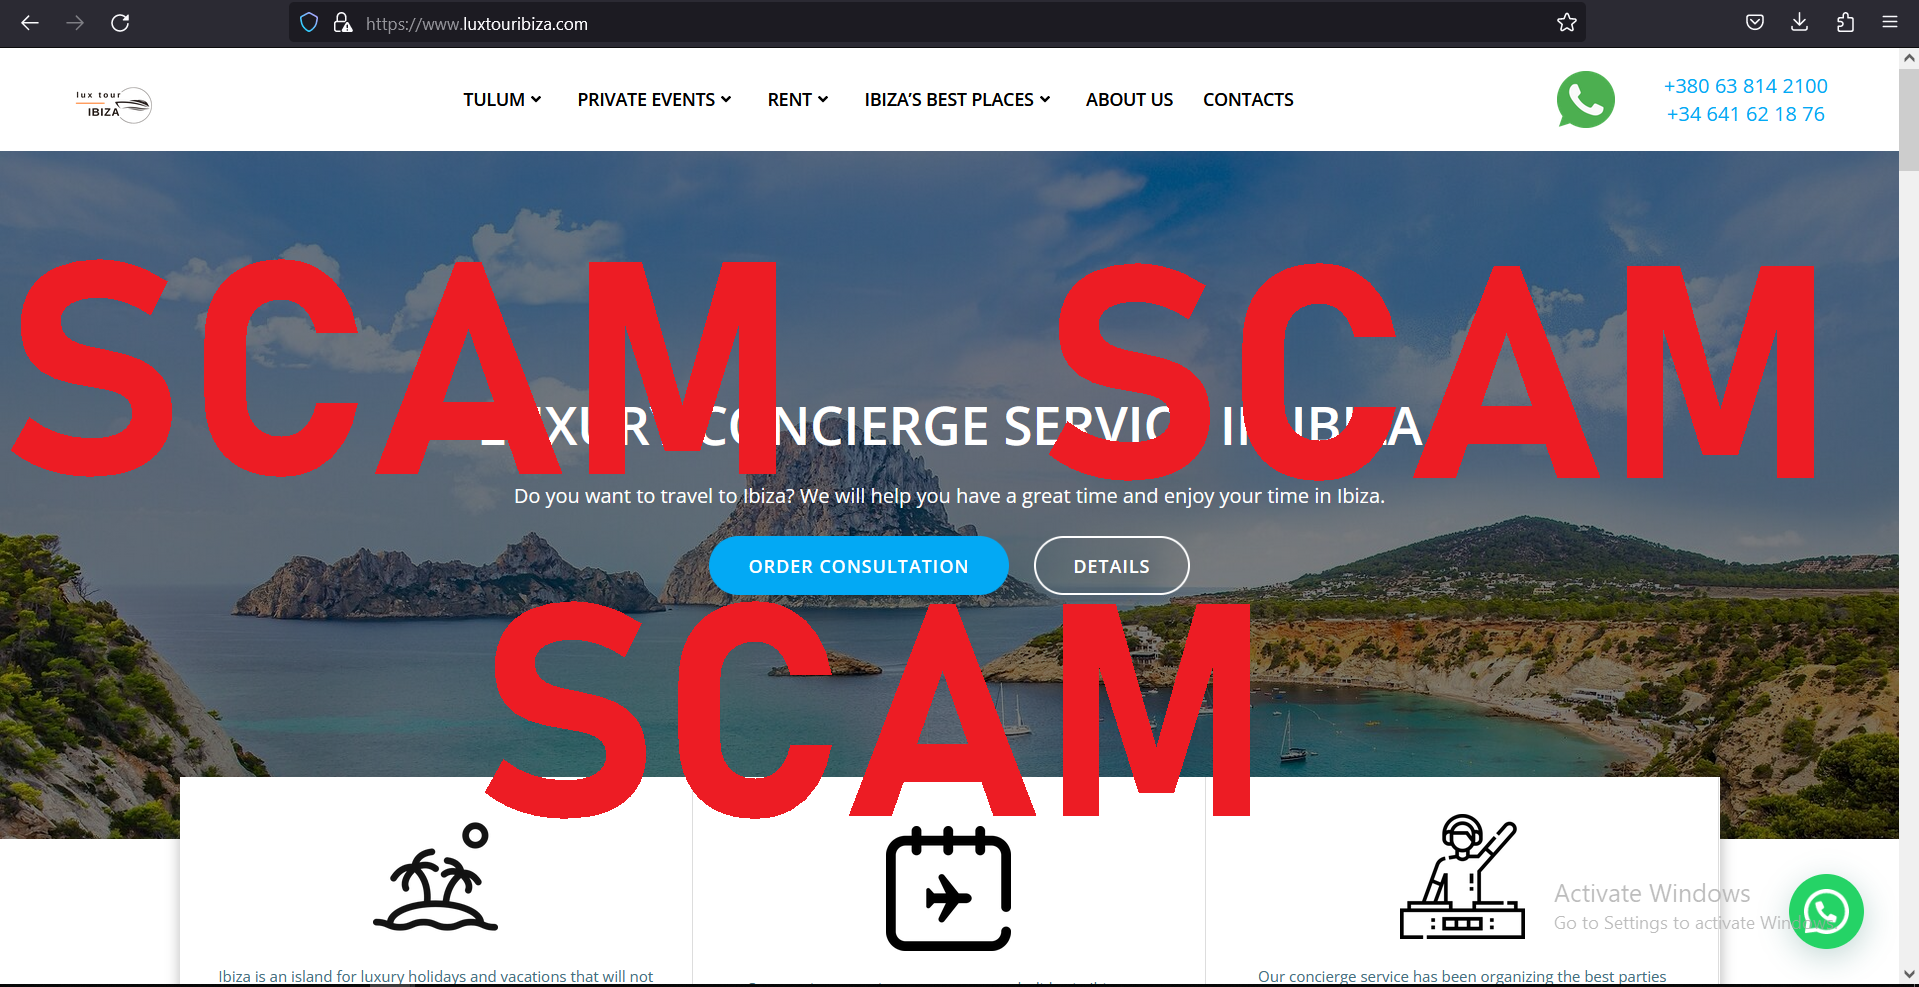 You are currently viewing Fraudulent website: luxtouribiza.com SCAM SCAM